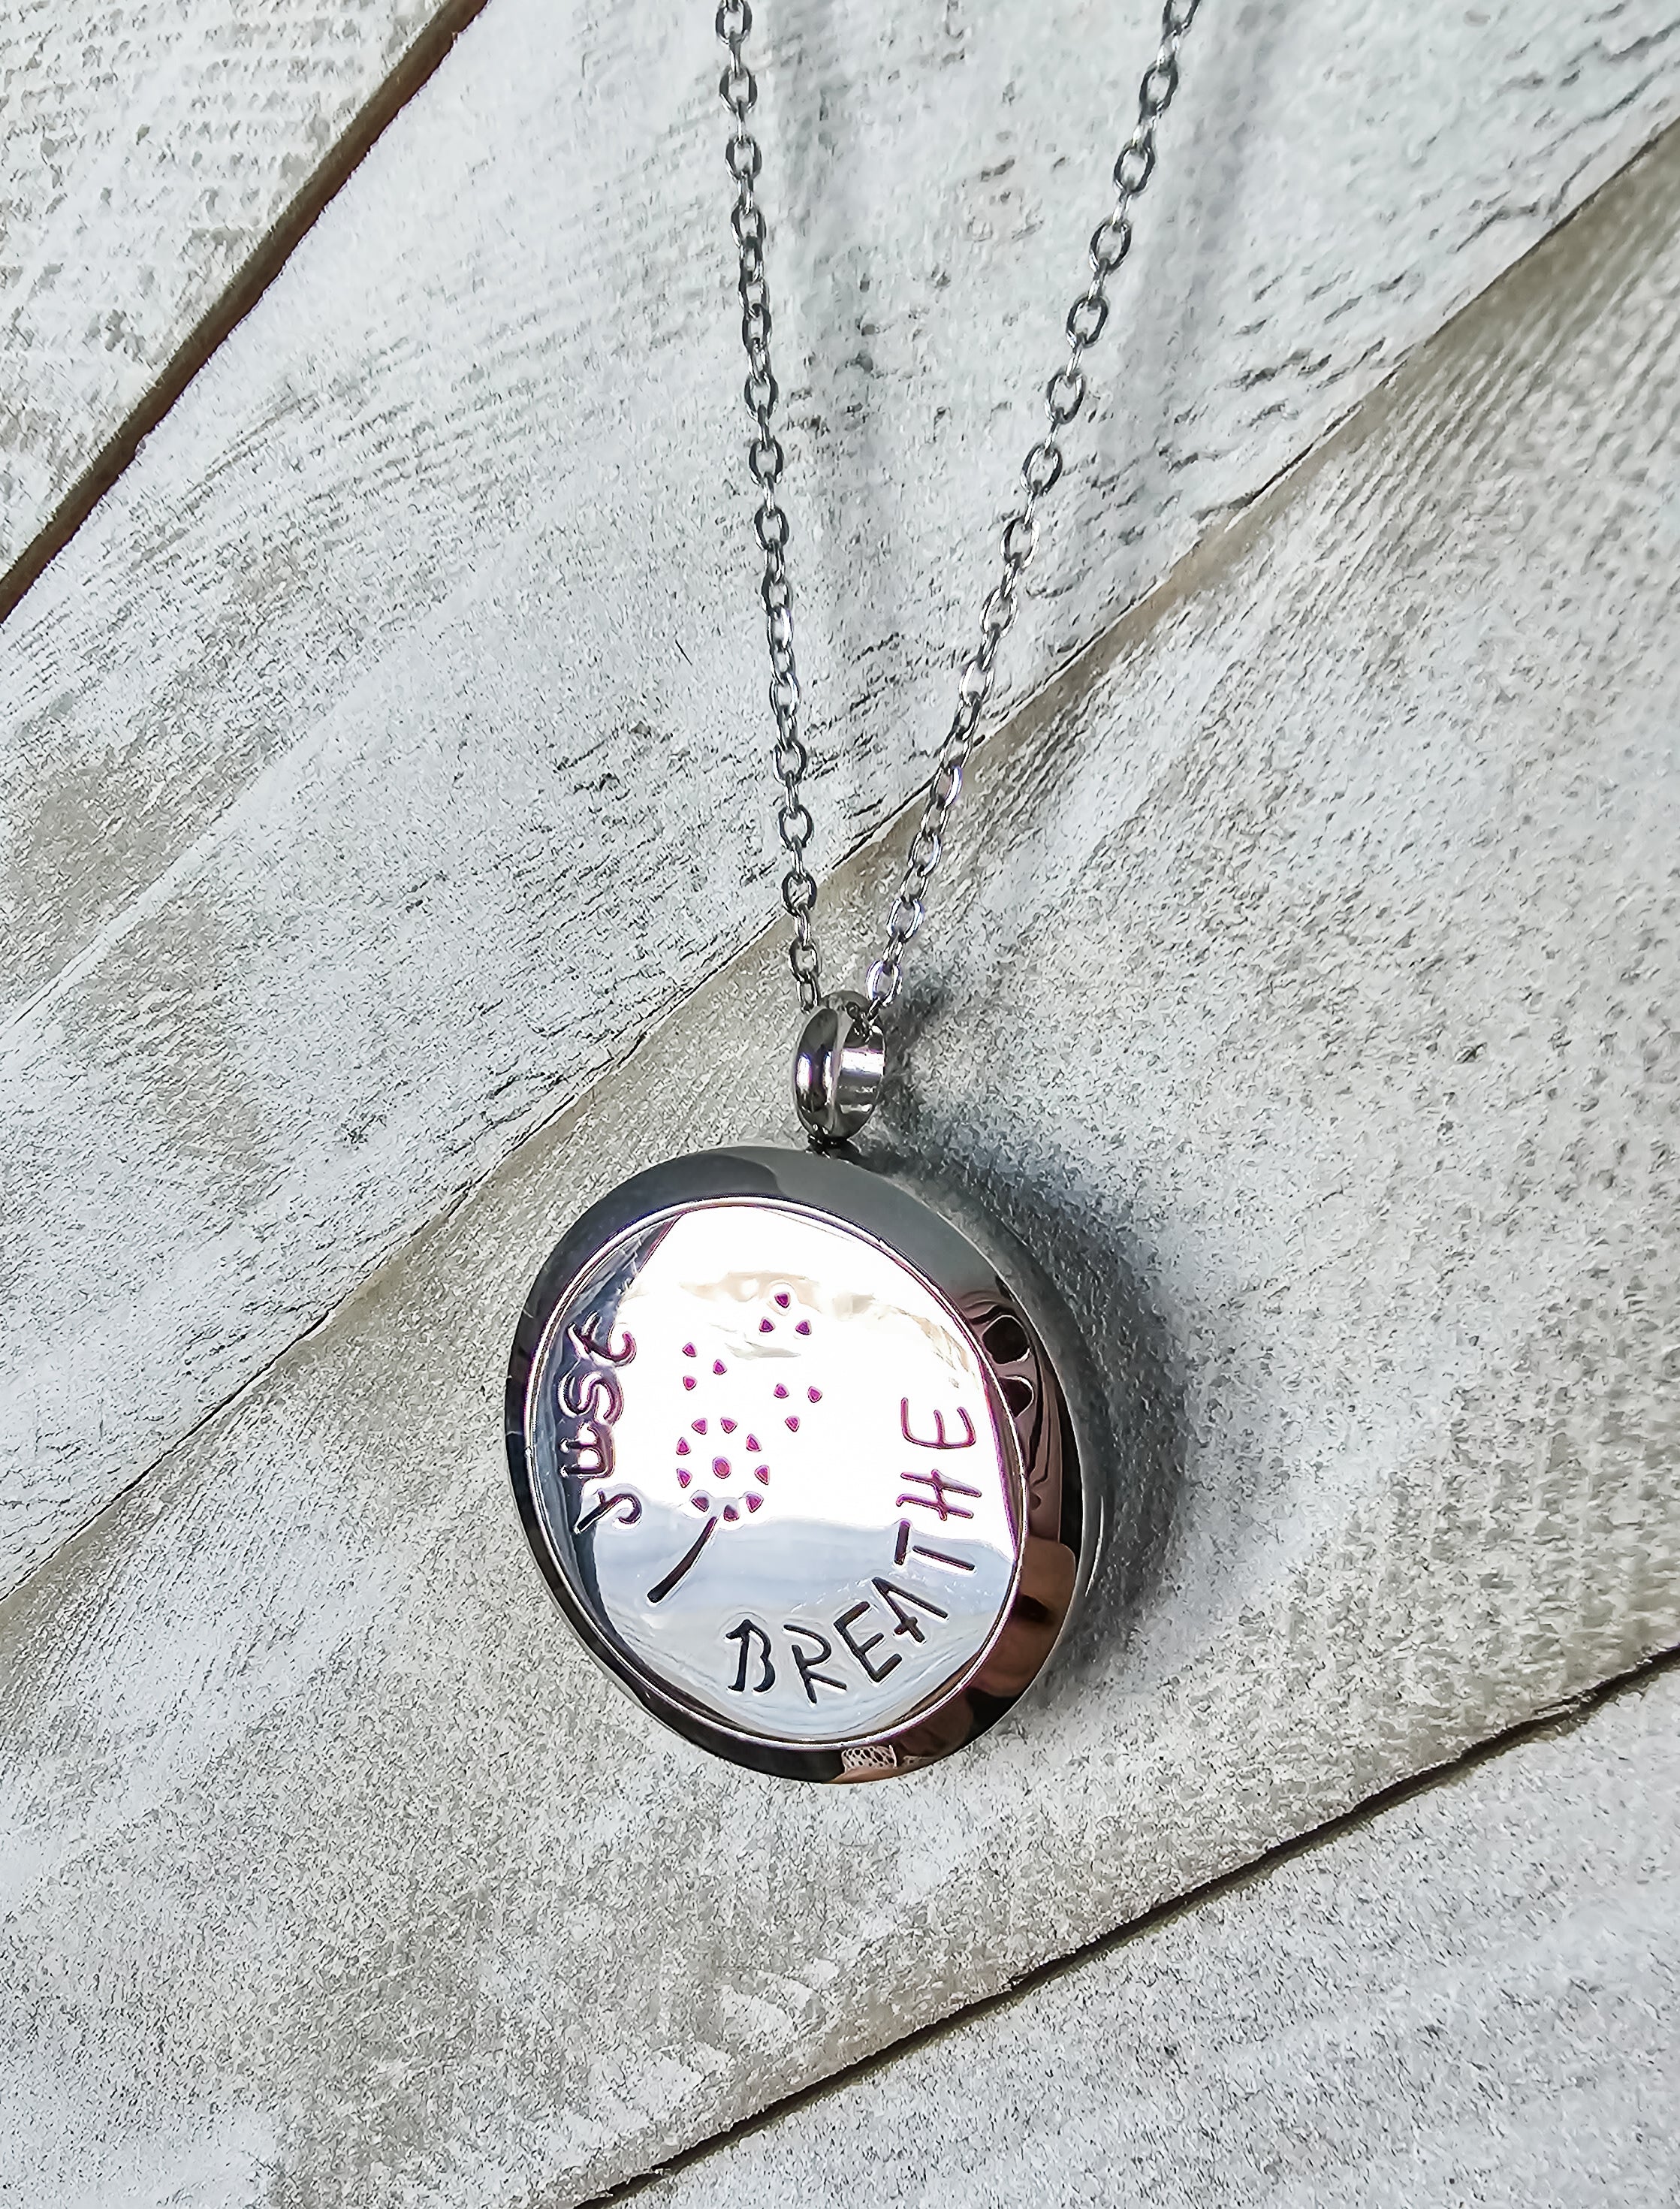 Aromatherapy - JUST BREATHE, Diffuser Pendant Necklace